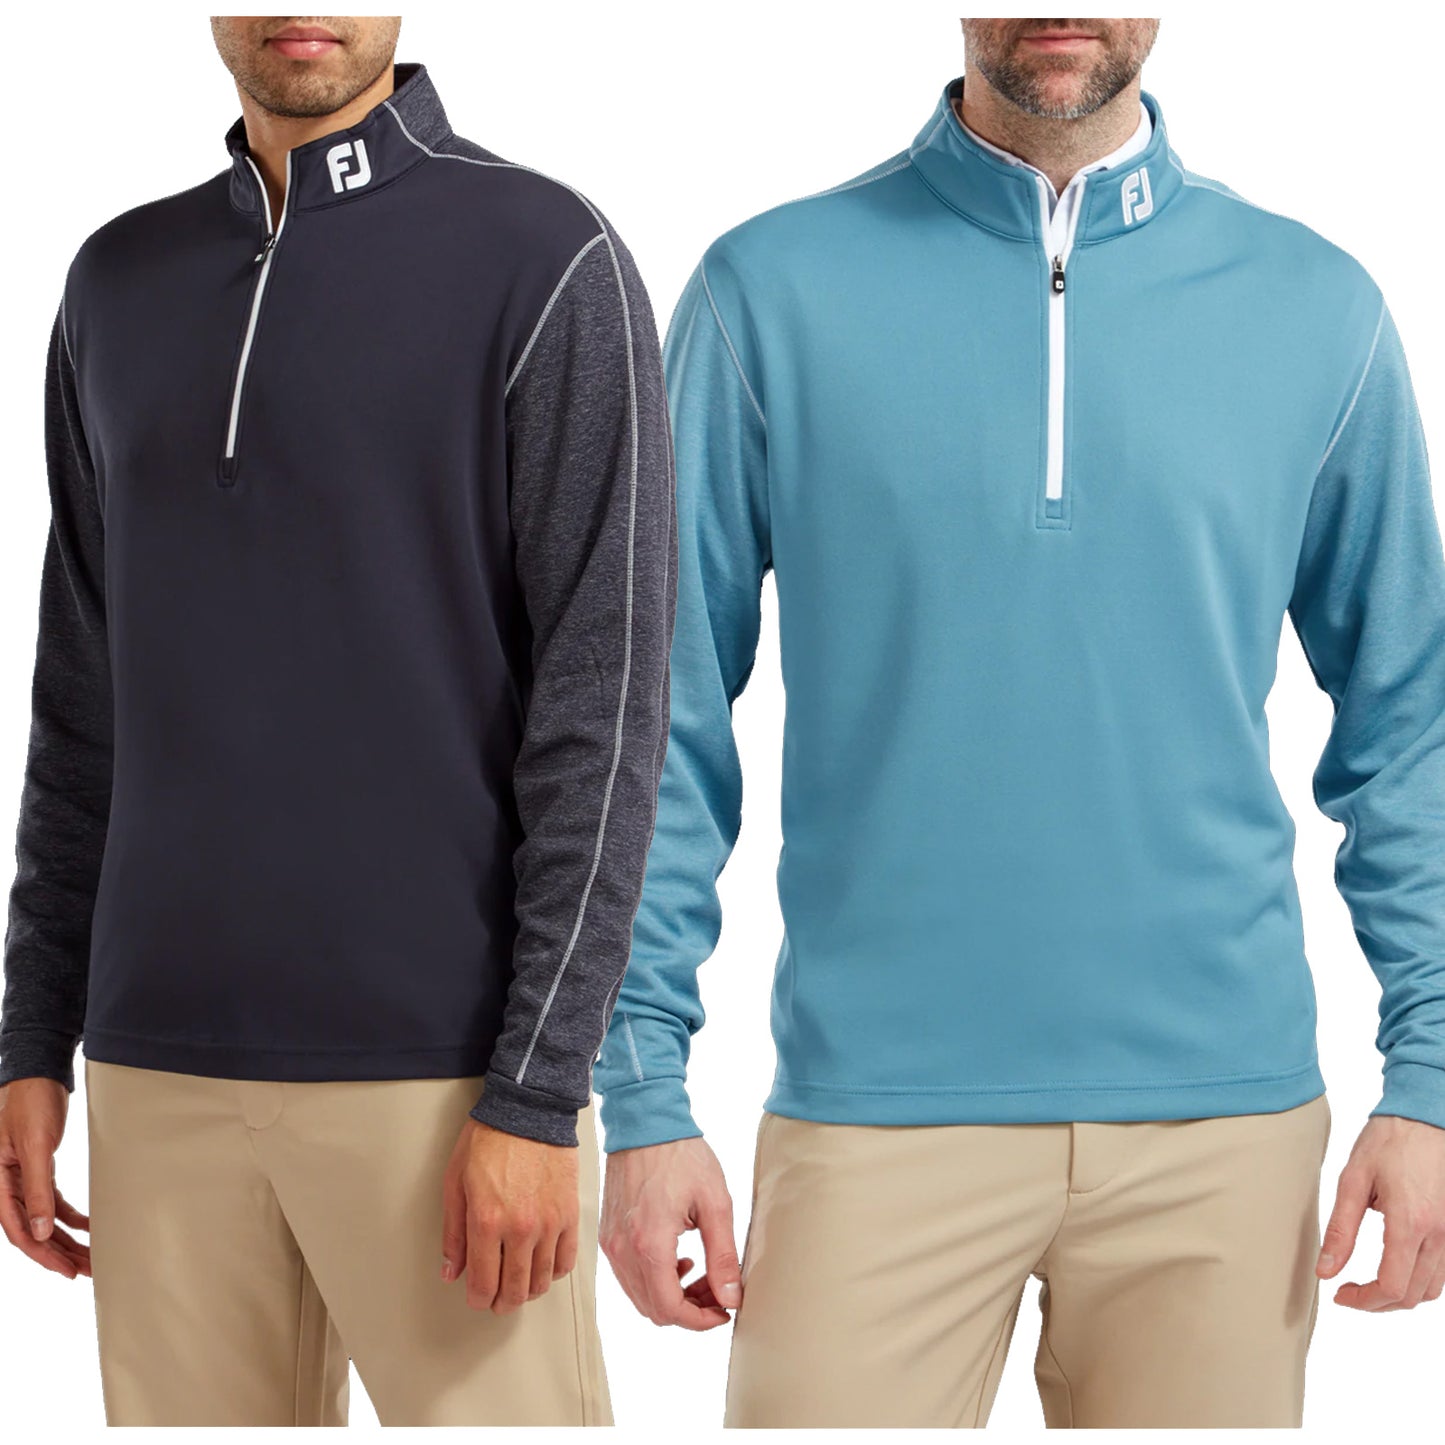 FootJoy Mens Tonal Heather Chill-Out Half Zip Top - S